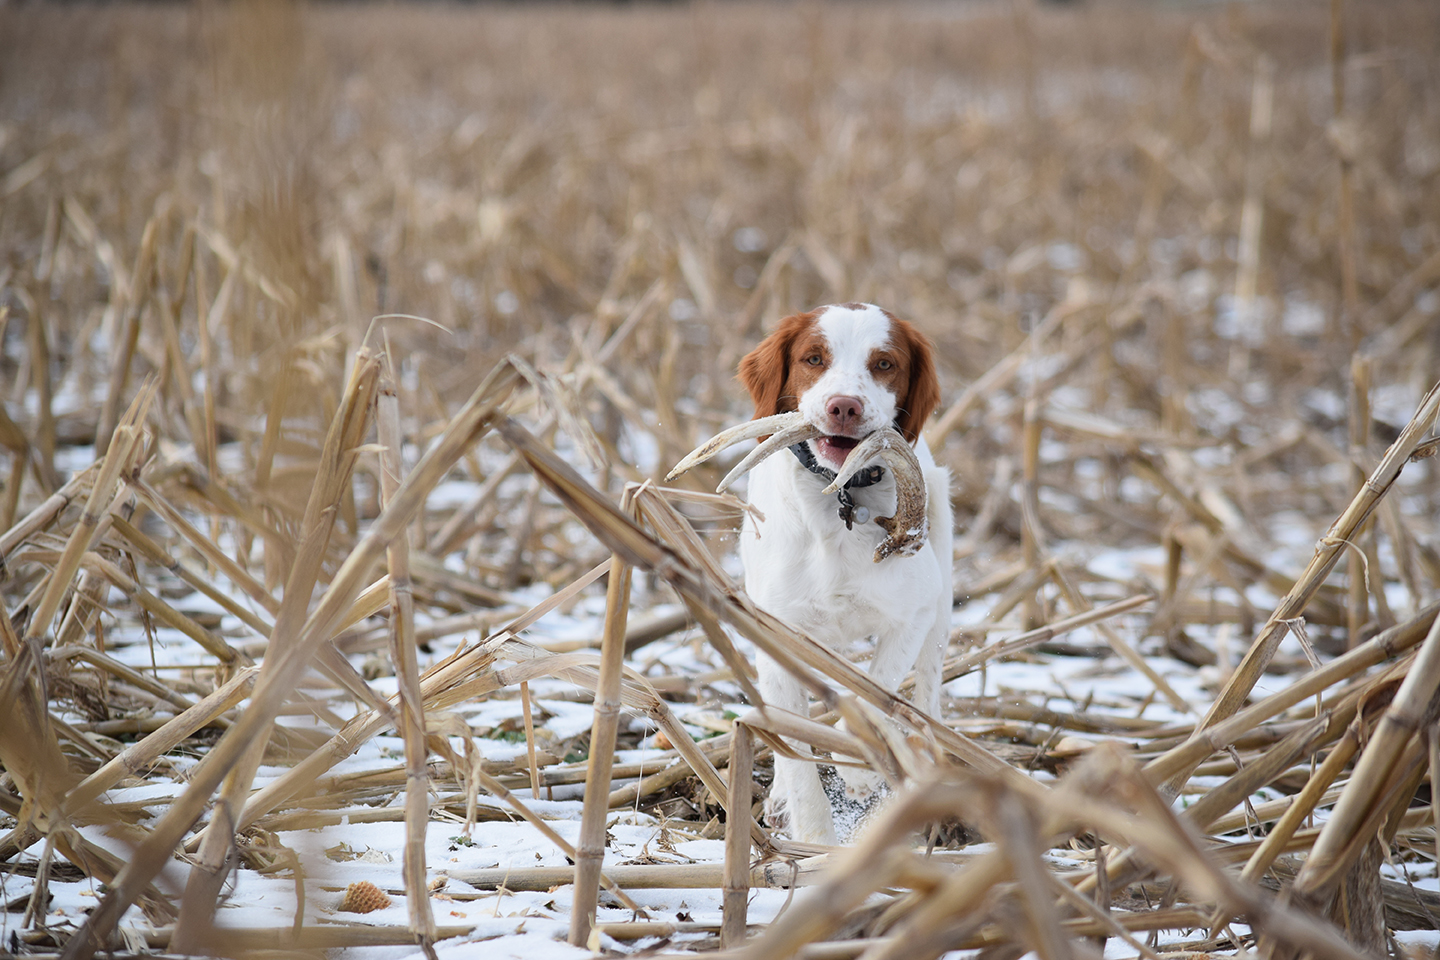 shed hunting dog training how to train your dog to shed